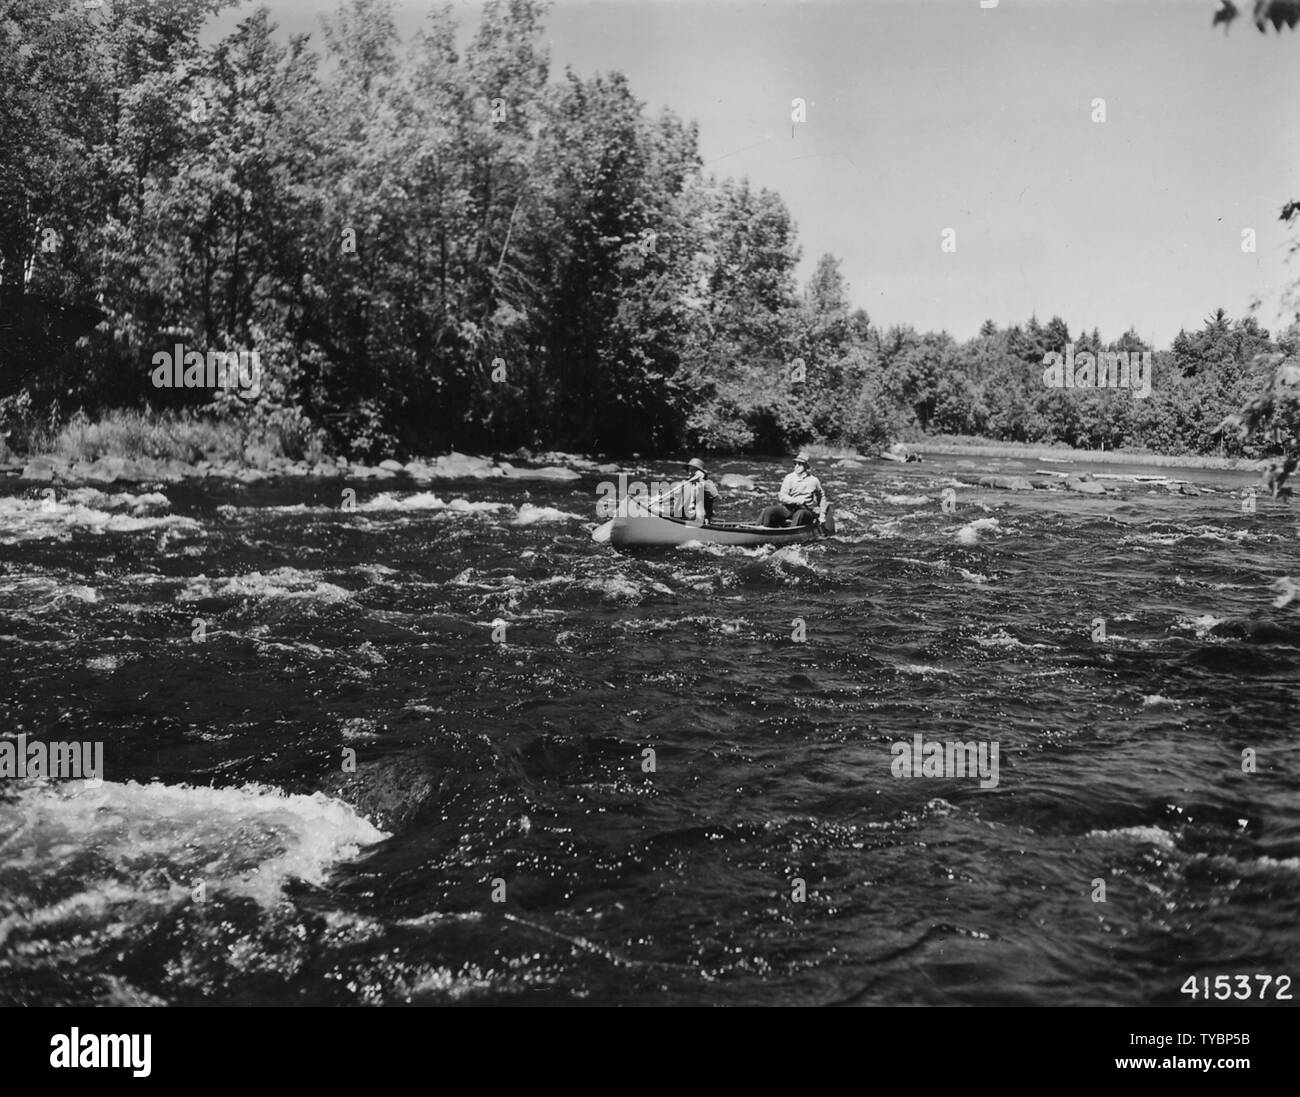 Photograph of Canoe Negotiating White Water on a Fishing Trip; Scope and content:  Original caption: Negotiating white water while on a fishing trip on the North Fork of Flambeau River. Stock Photo